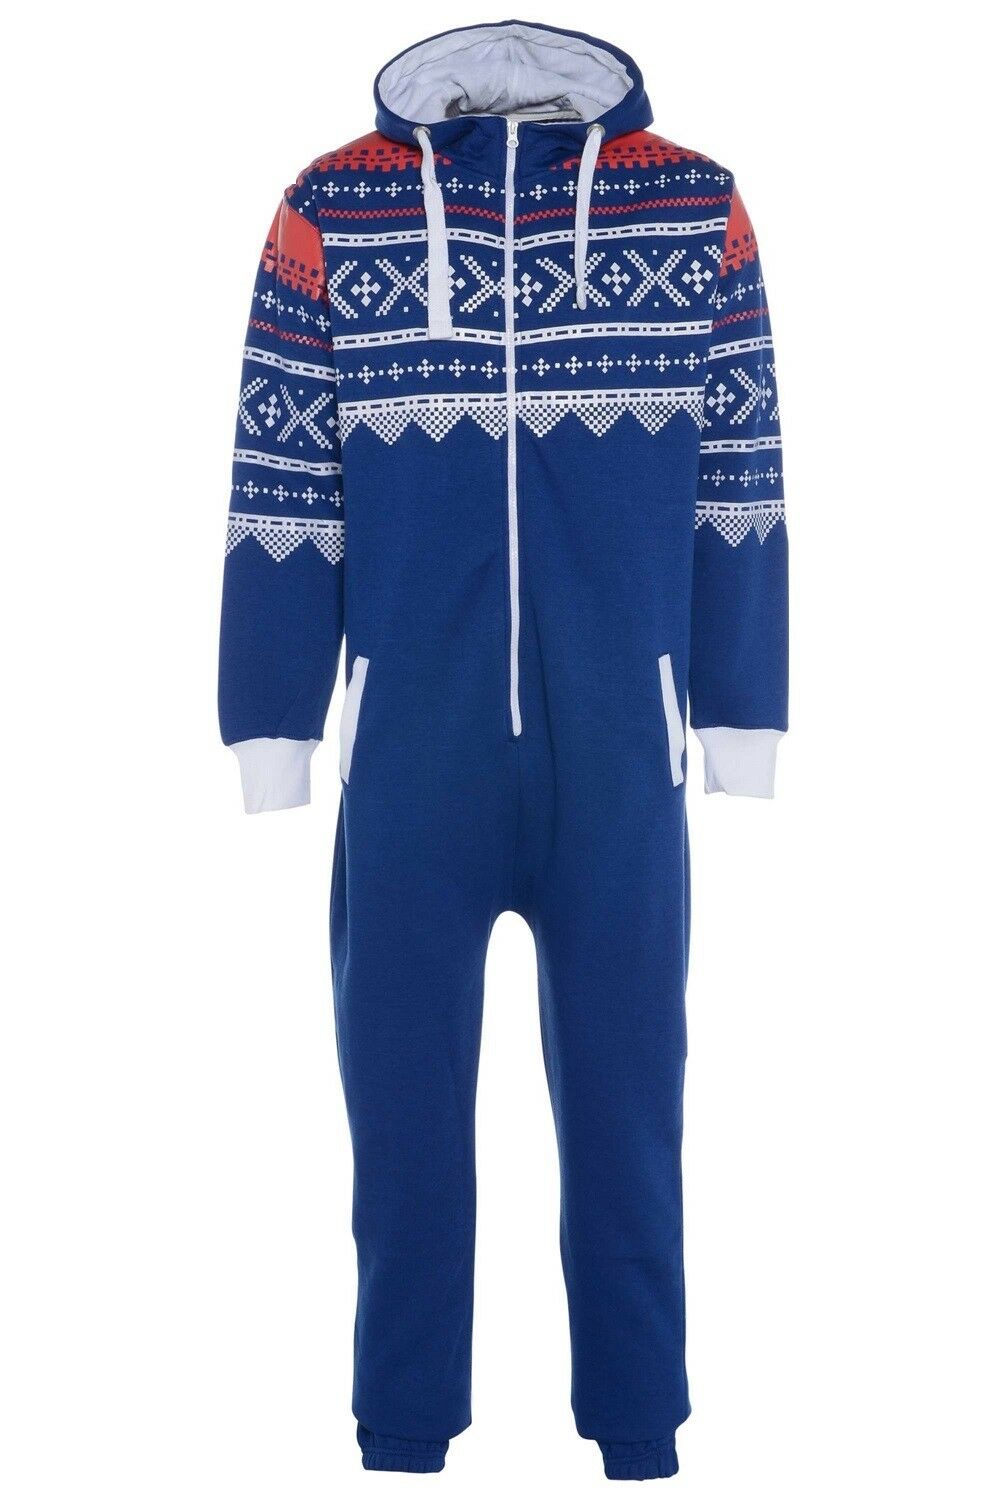 Adult Royal Blue Aztec Design Onesie. Cotton Lined Hood With Fleece Lining In The Rest Of The Onesie. The Cuffs and Ankles Are Ribbed Elastic. These Are To Be Worn Loosely. Sizes Small To X- Large.